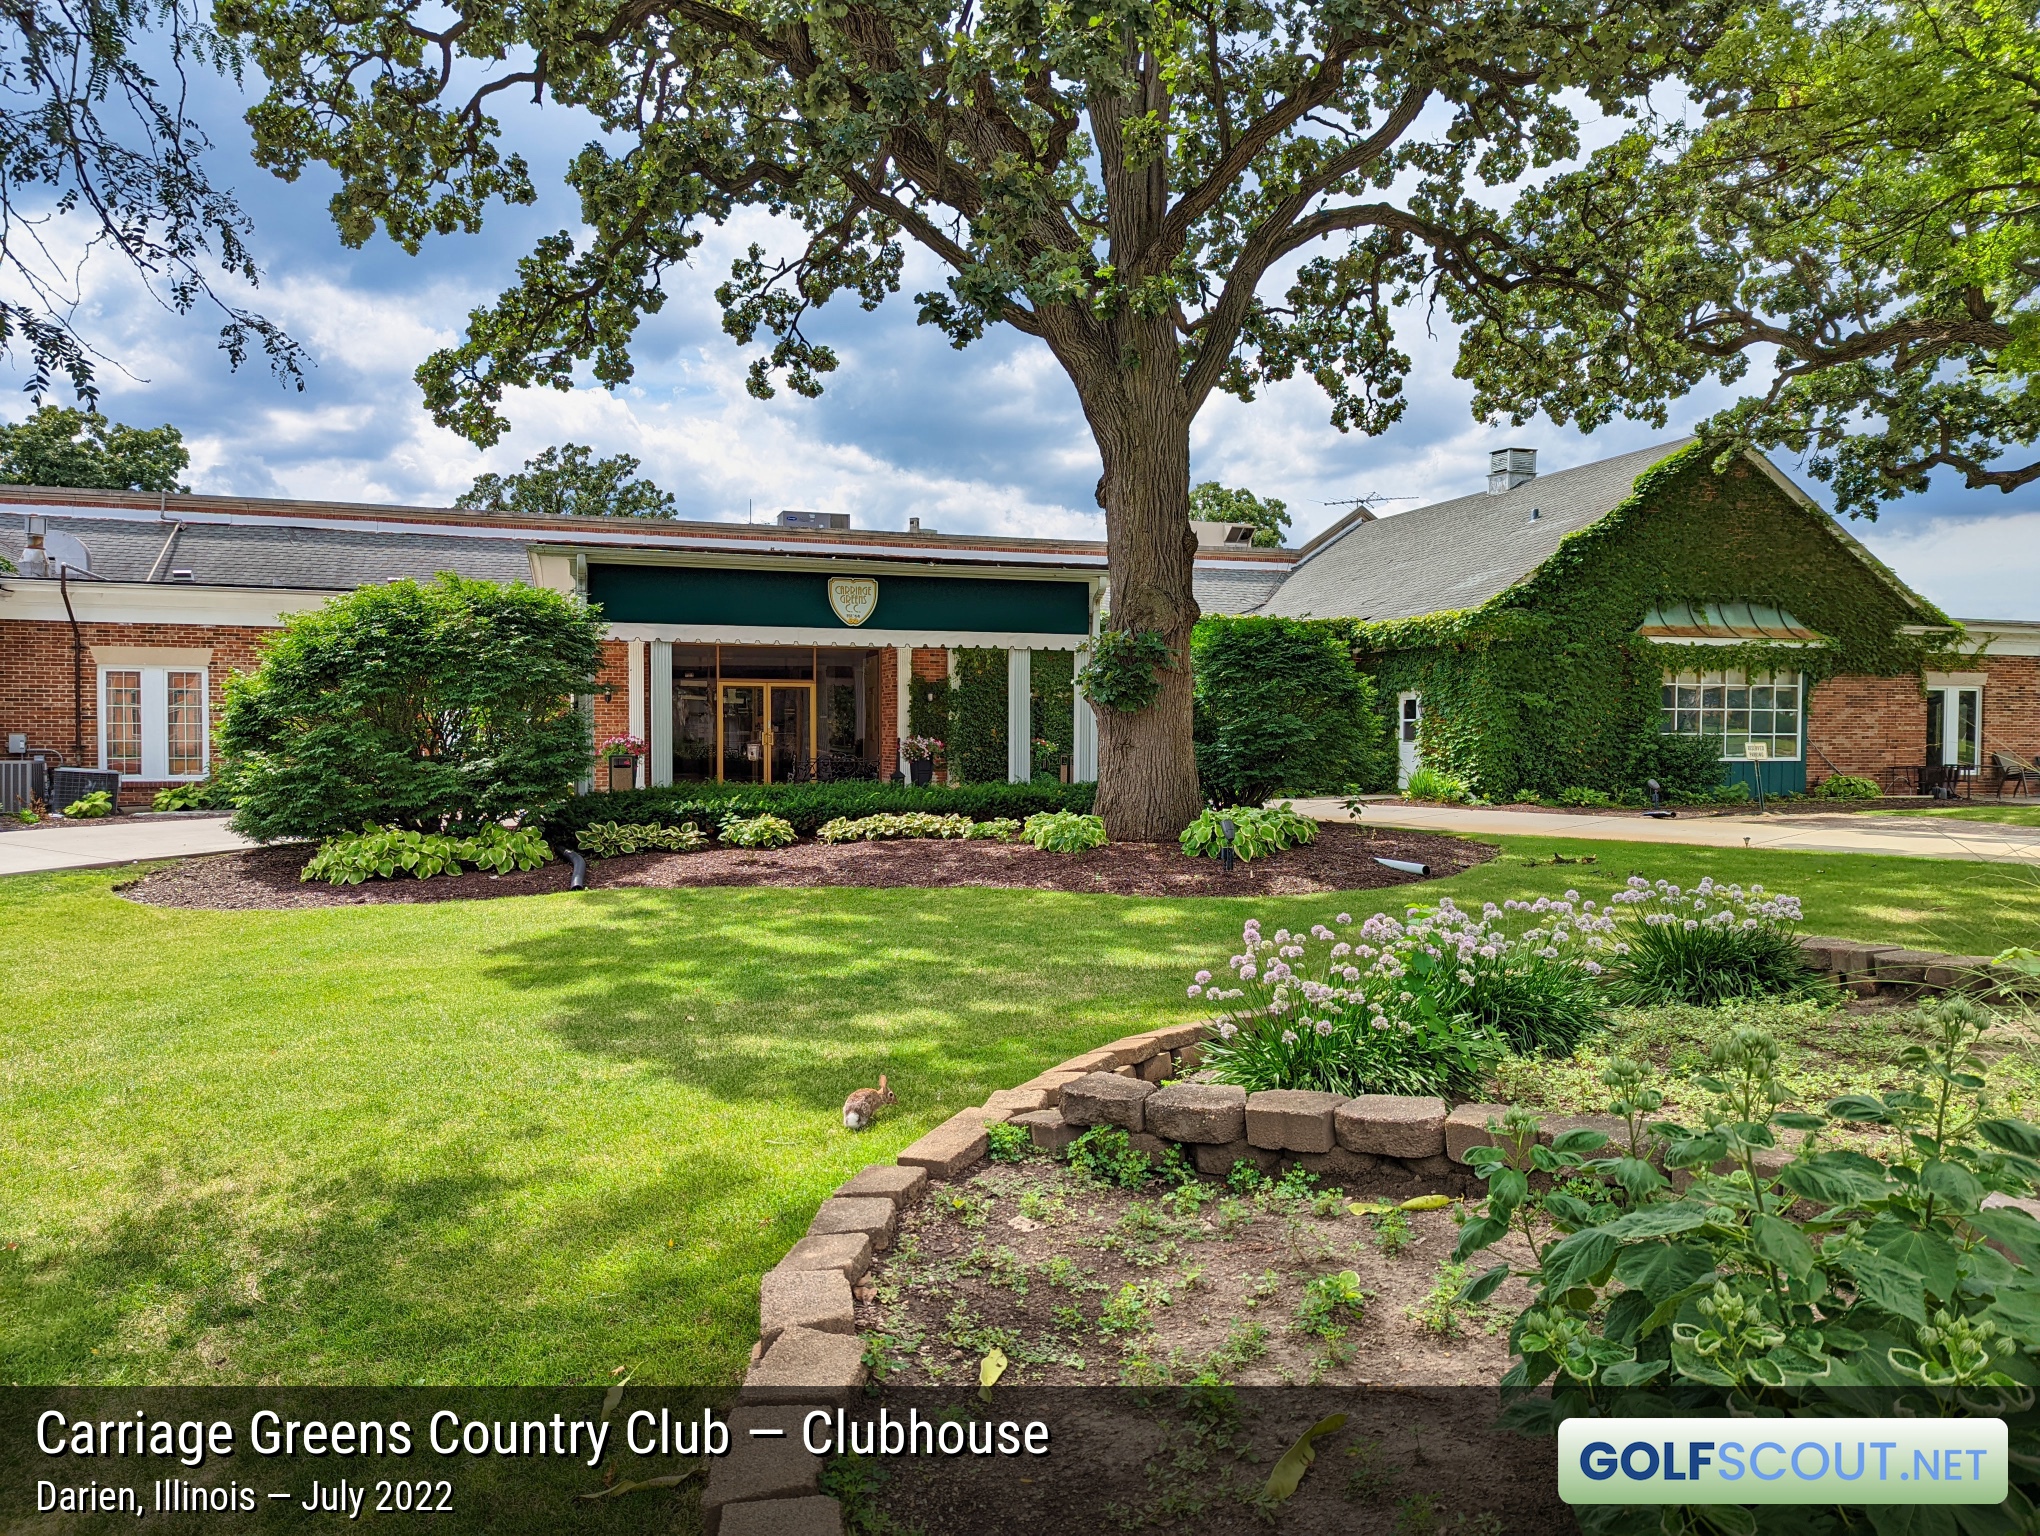 Photo of the clubhouse at Carriage Greens Country Club in Darien, Illinois. 